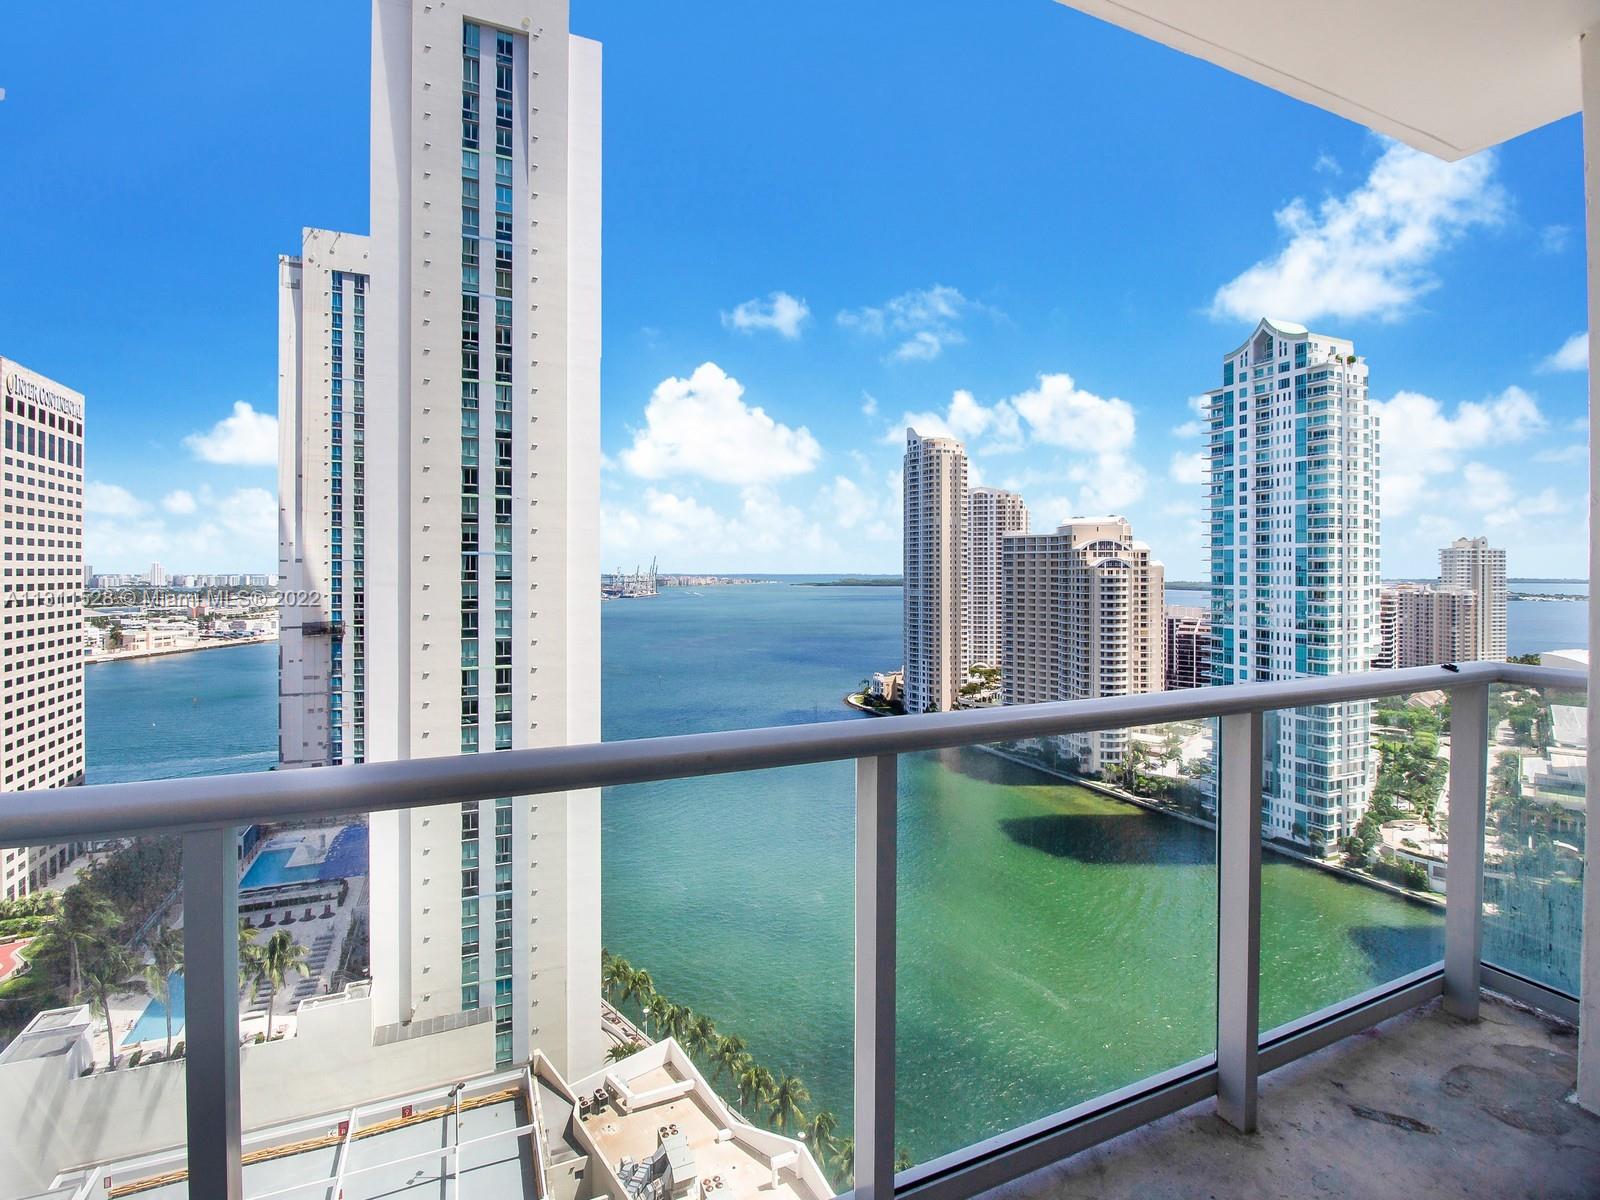 The Met condominium located in Downtown Miami.  This unit has great views to the Bay, it is very open with a split floorplan.  Building has an array of amenities and great location.  Please call listing agent for a private showing